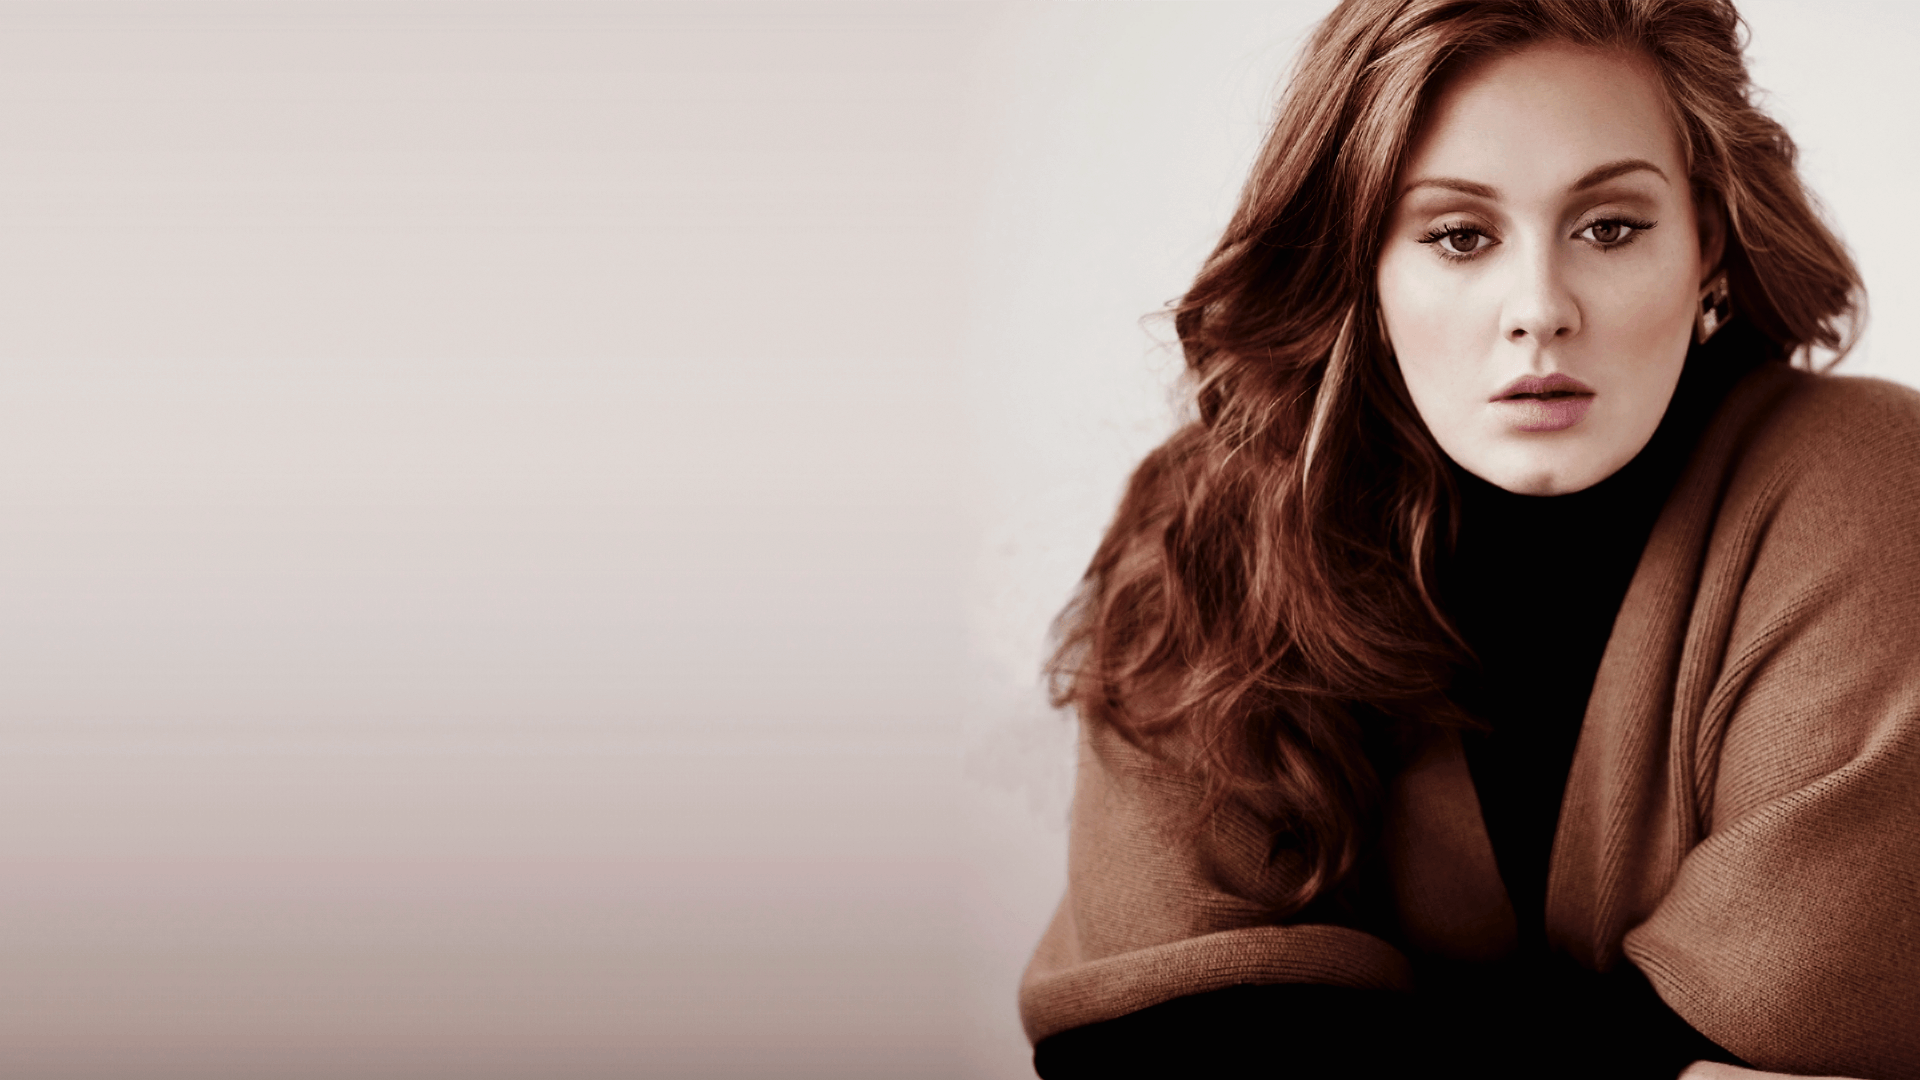 Adele Wallpaper High Resolution and Quality Download